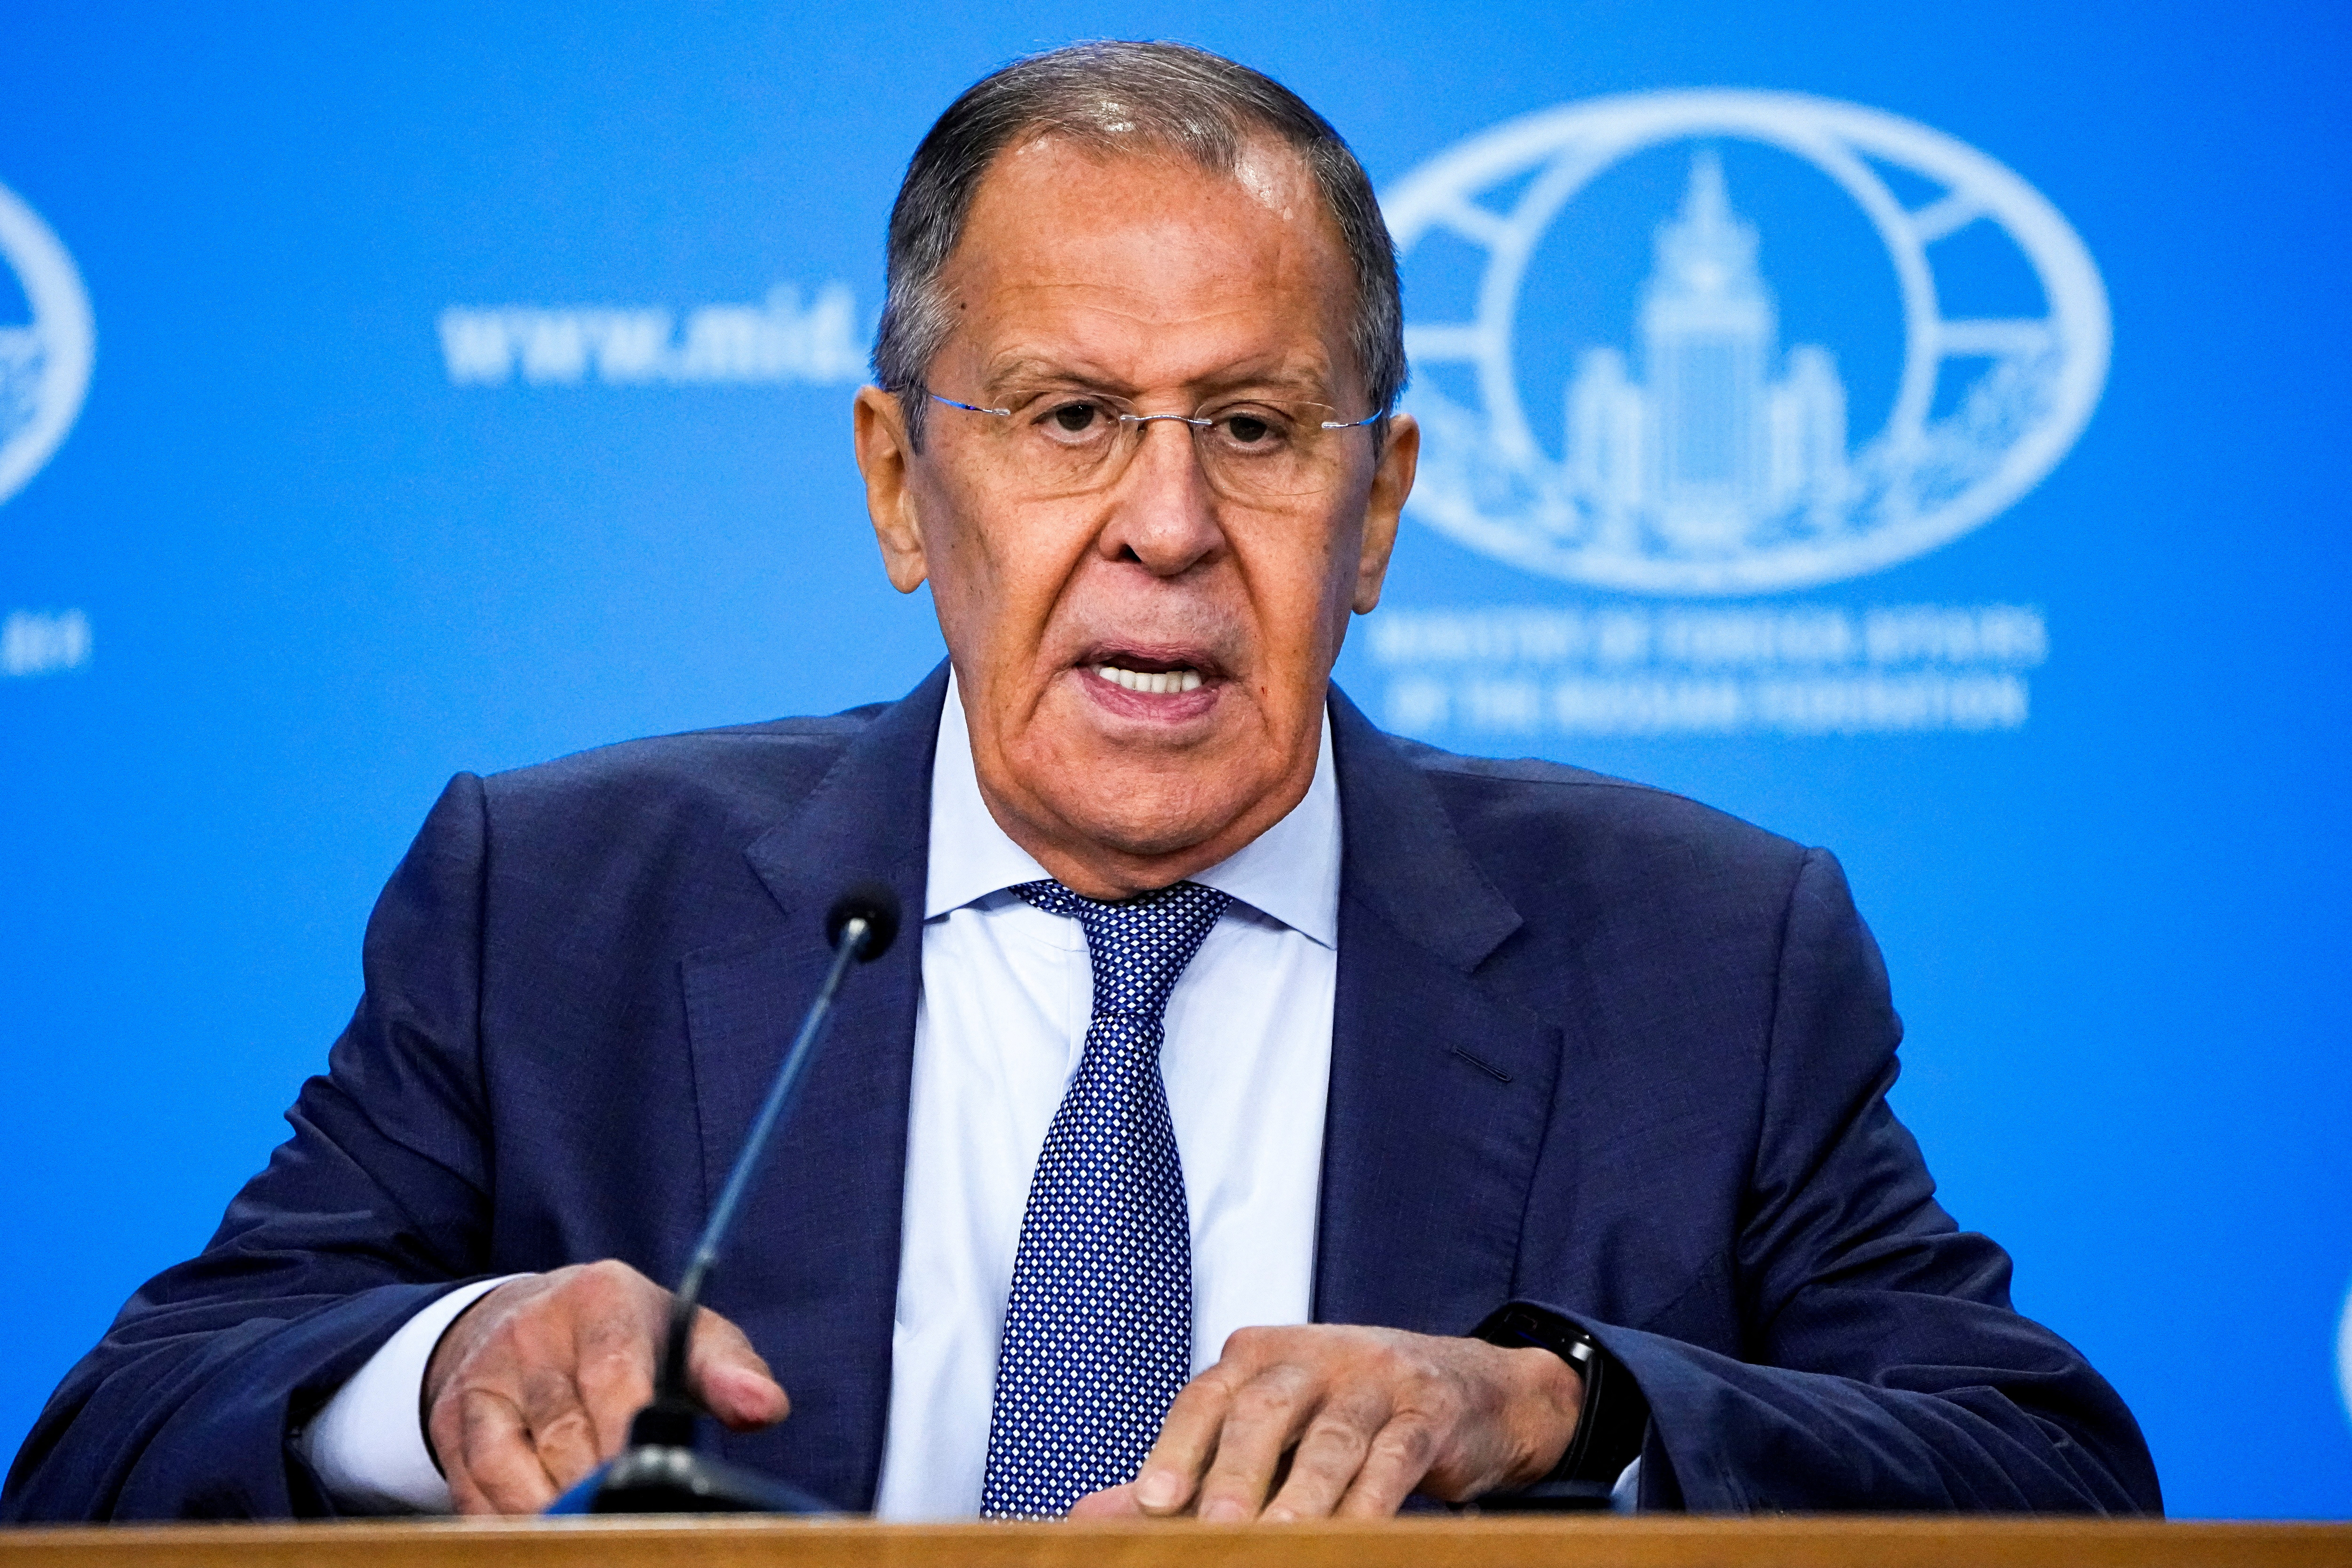 Russia's Foreign Minister Sergei Lavrov delivers his speech as he meets with heads of diplomatic missions accredited in Russia, in Moscow